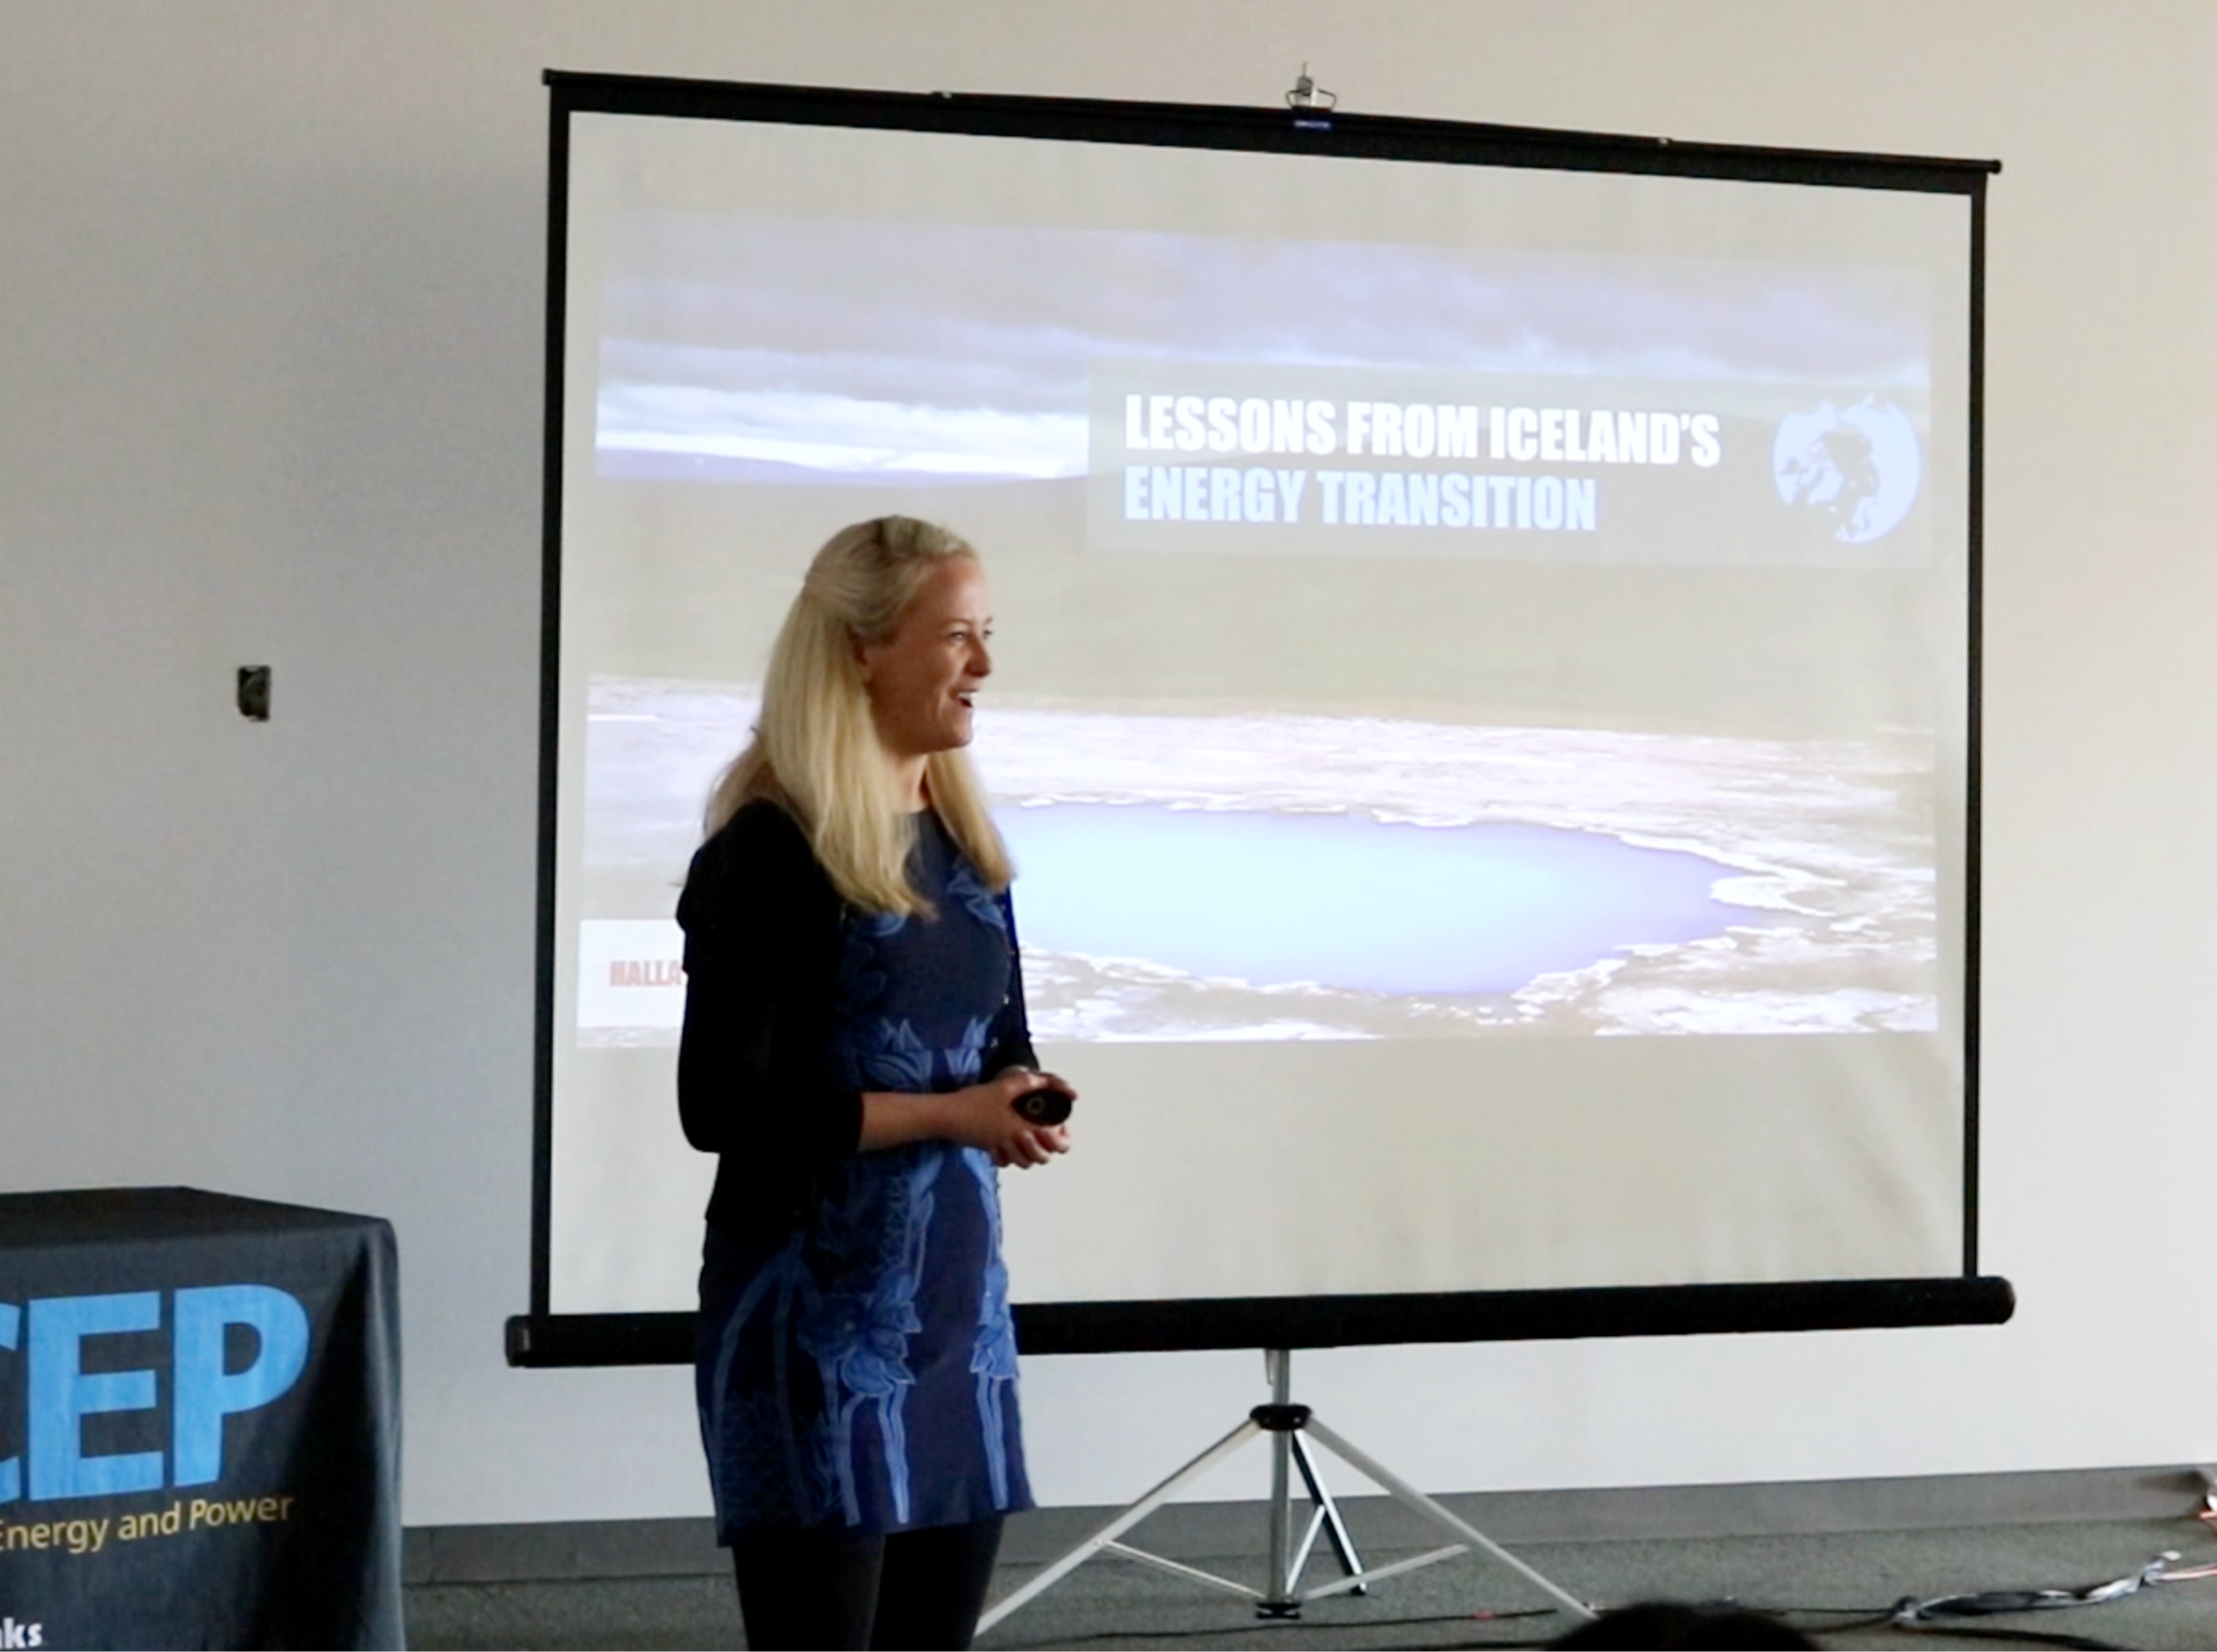 Week of the Arctic: Lessons from Iceland Presentation Drew Crowds